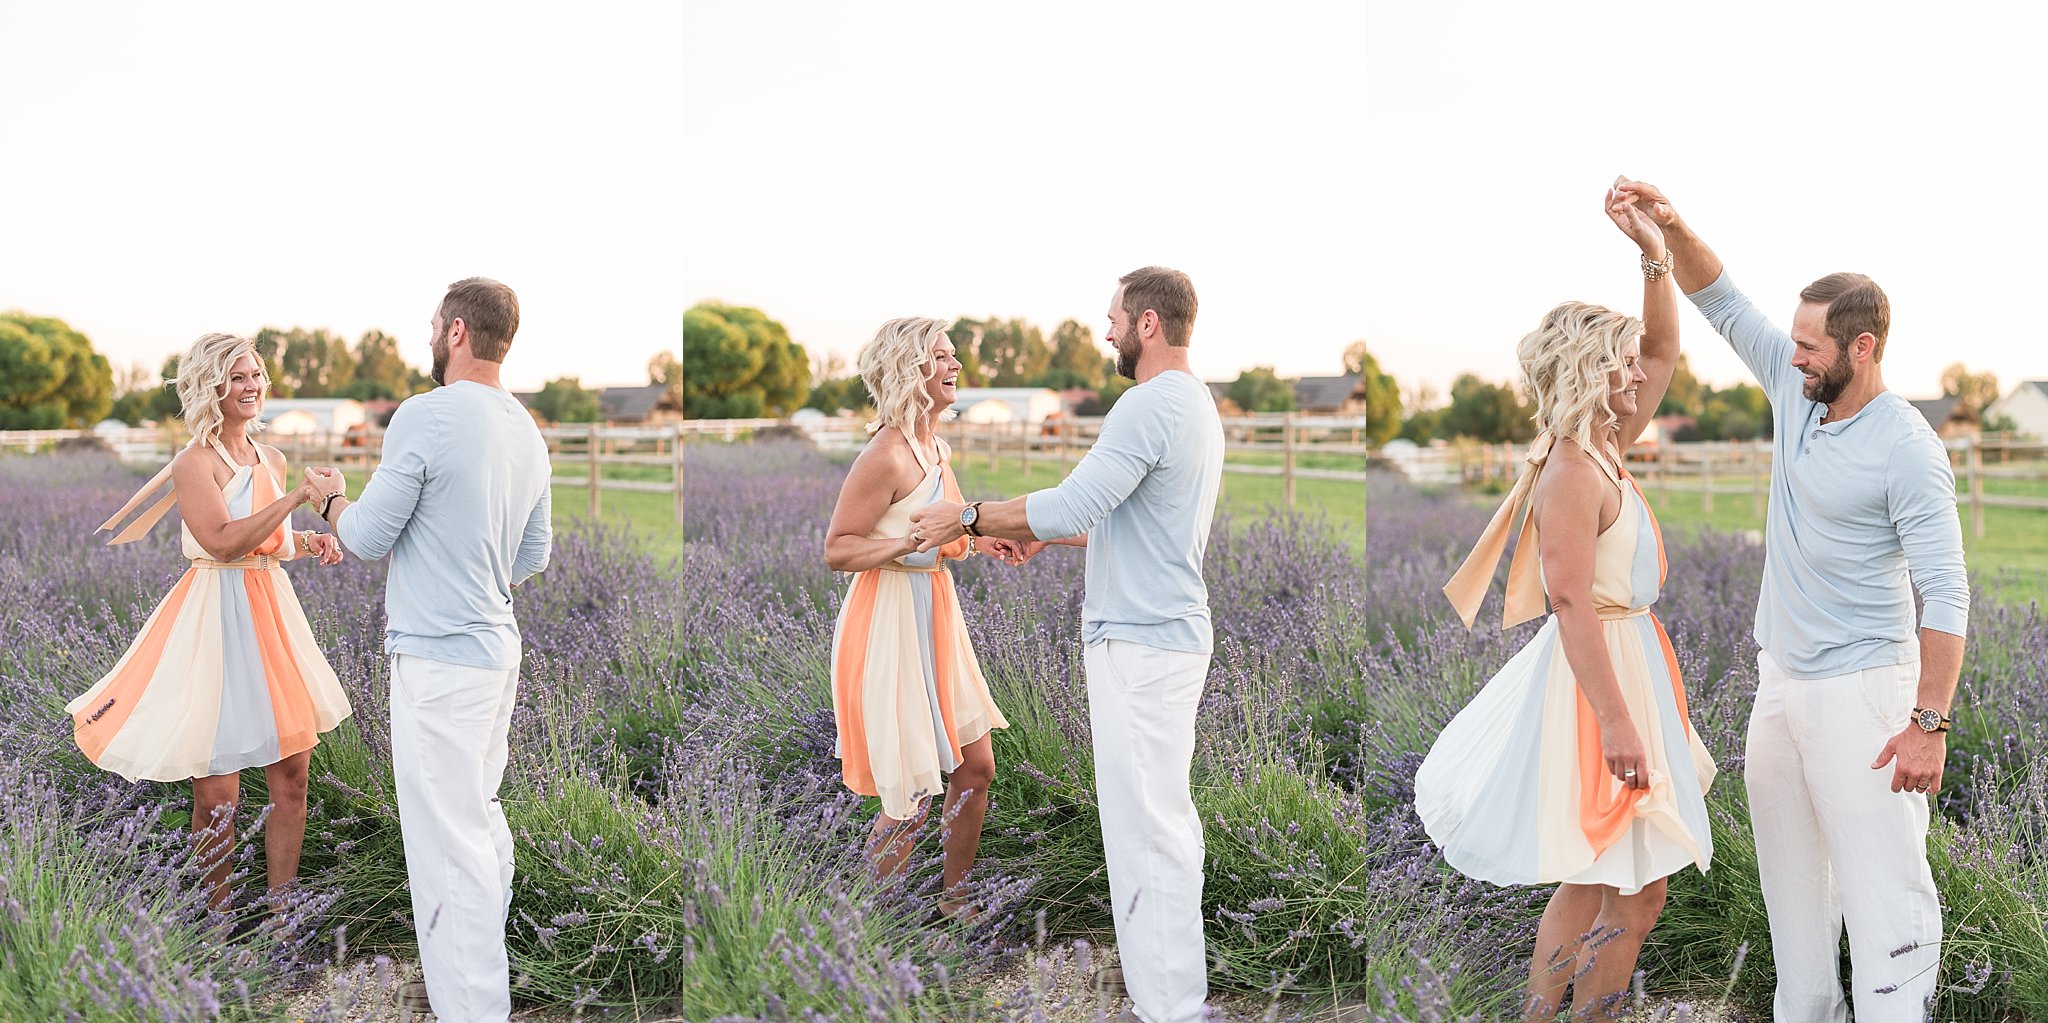 Lavender Field Photoshoot at Red Chair Lavender Field21.jpg